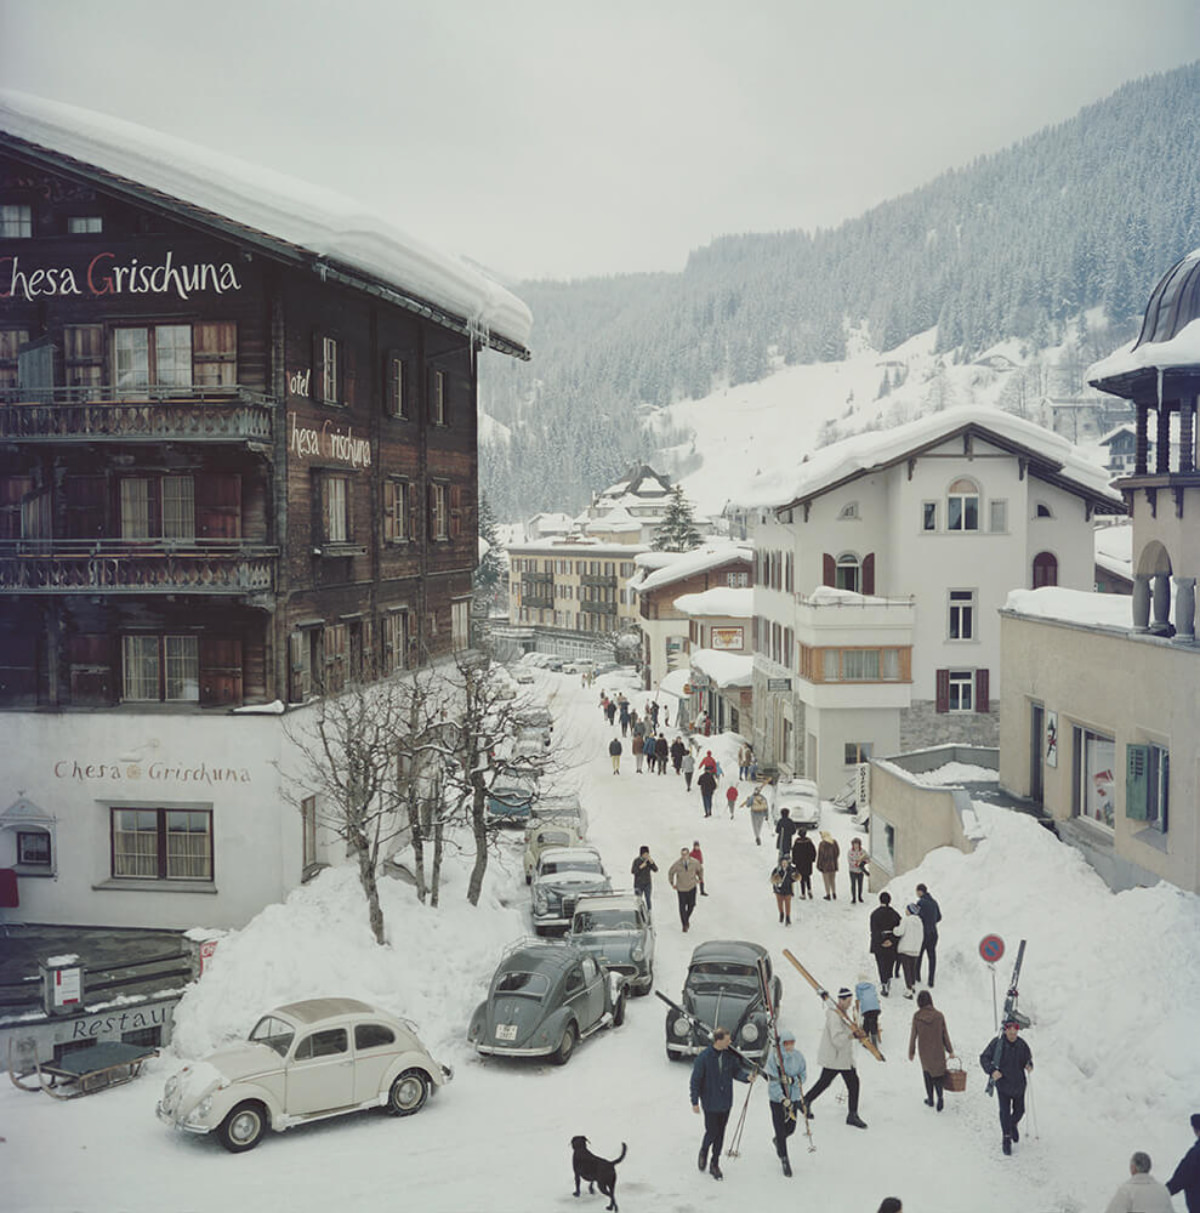 Skiers pass by the Hotel Chesa Grischuna in Klosters, 1963.